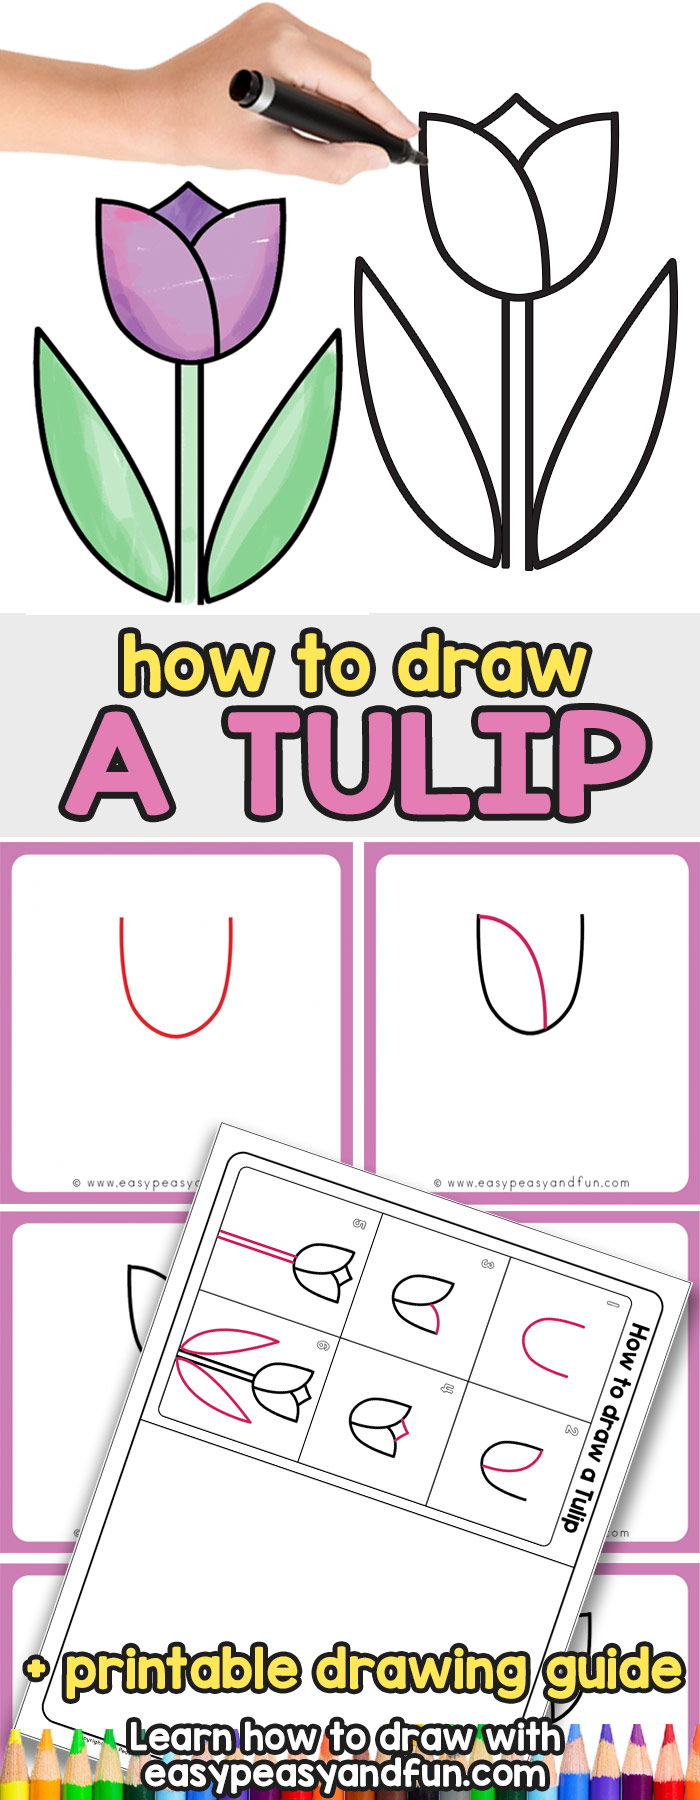 How to Draw a Tulip - Easy Step By Step Drawing Tutorial for Kids